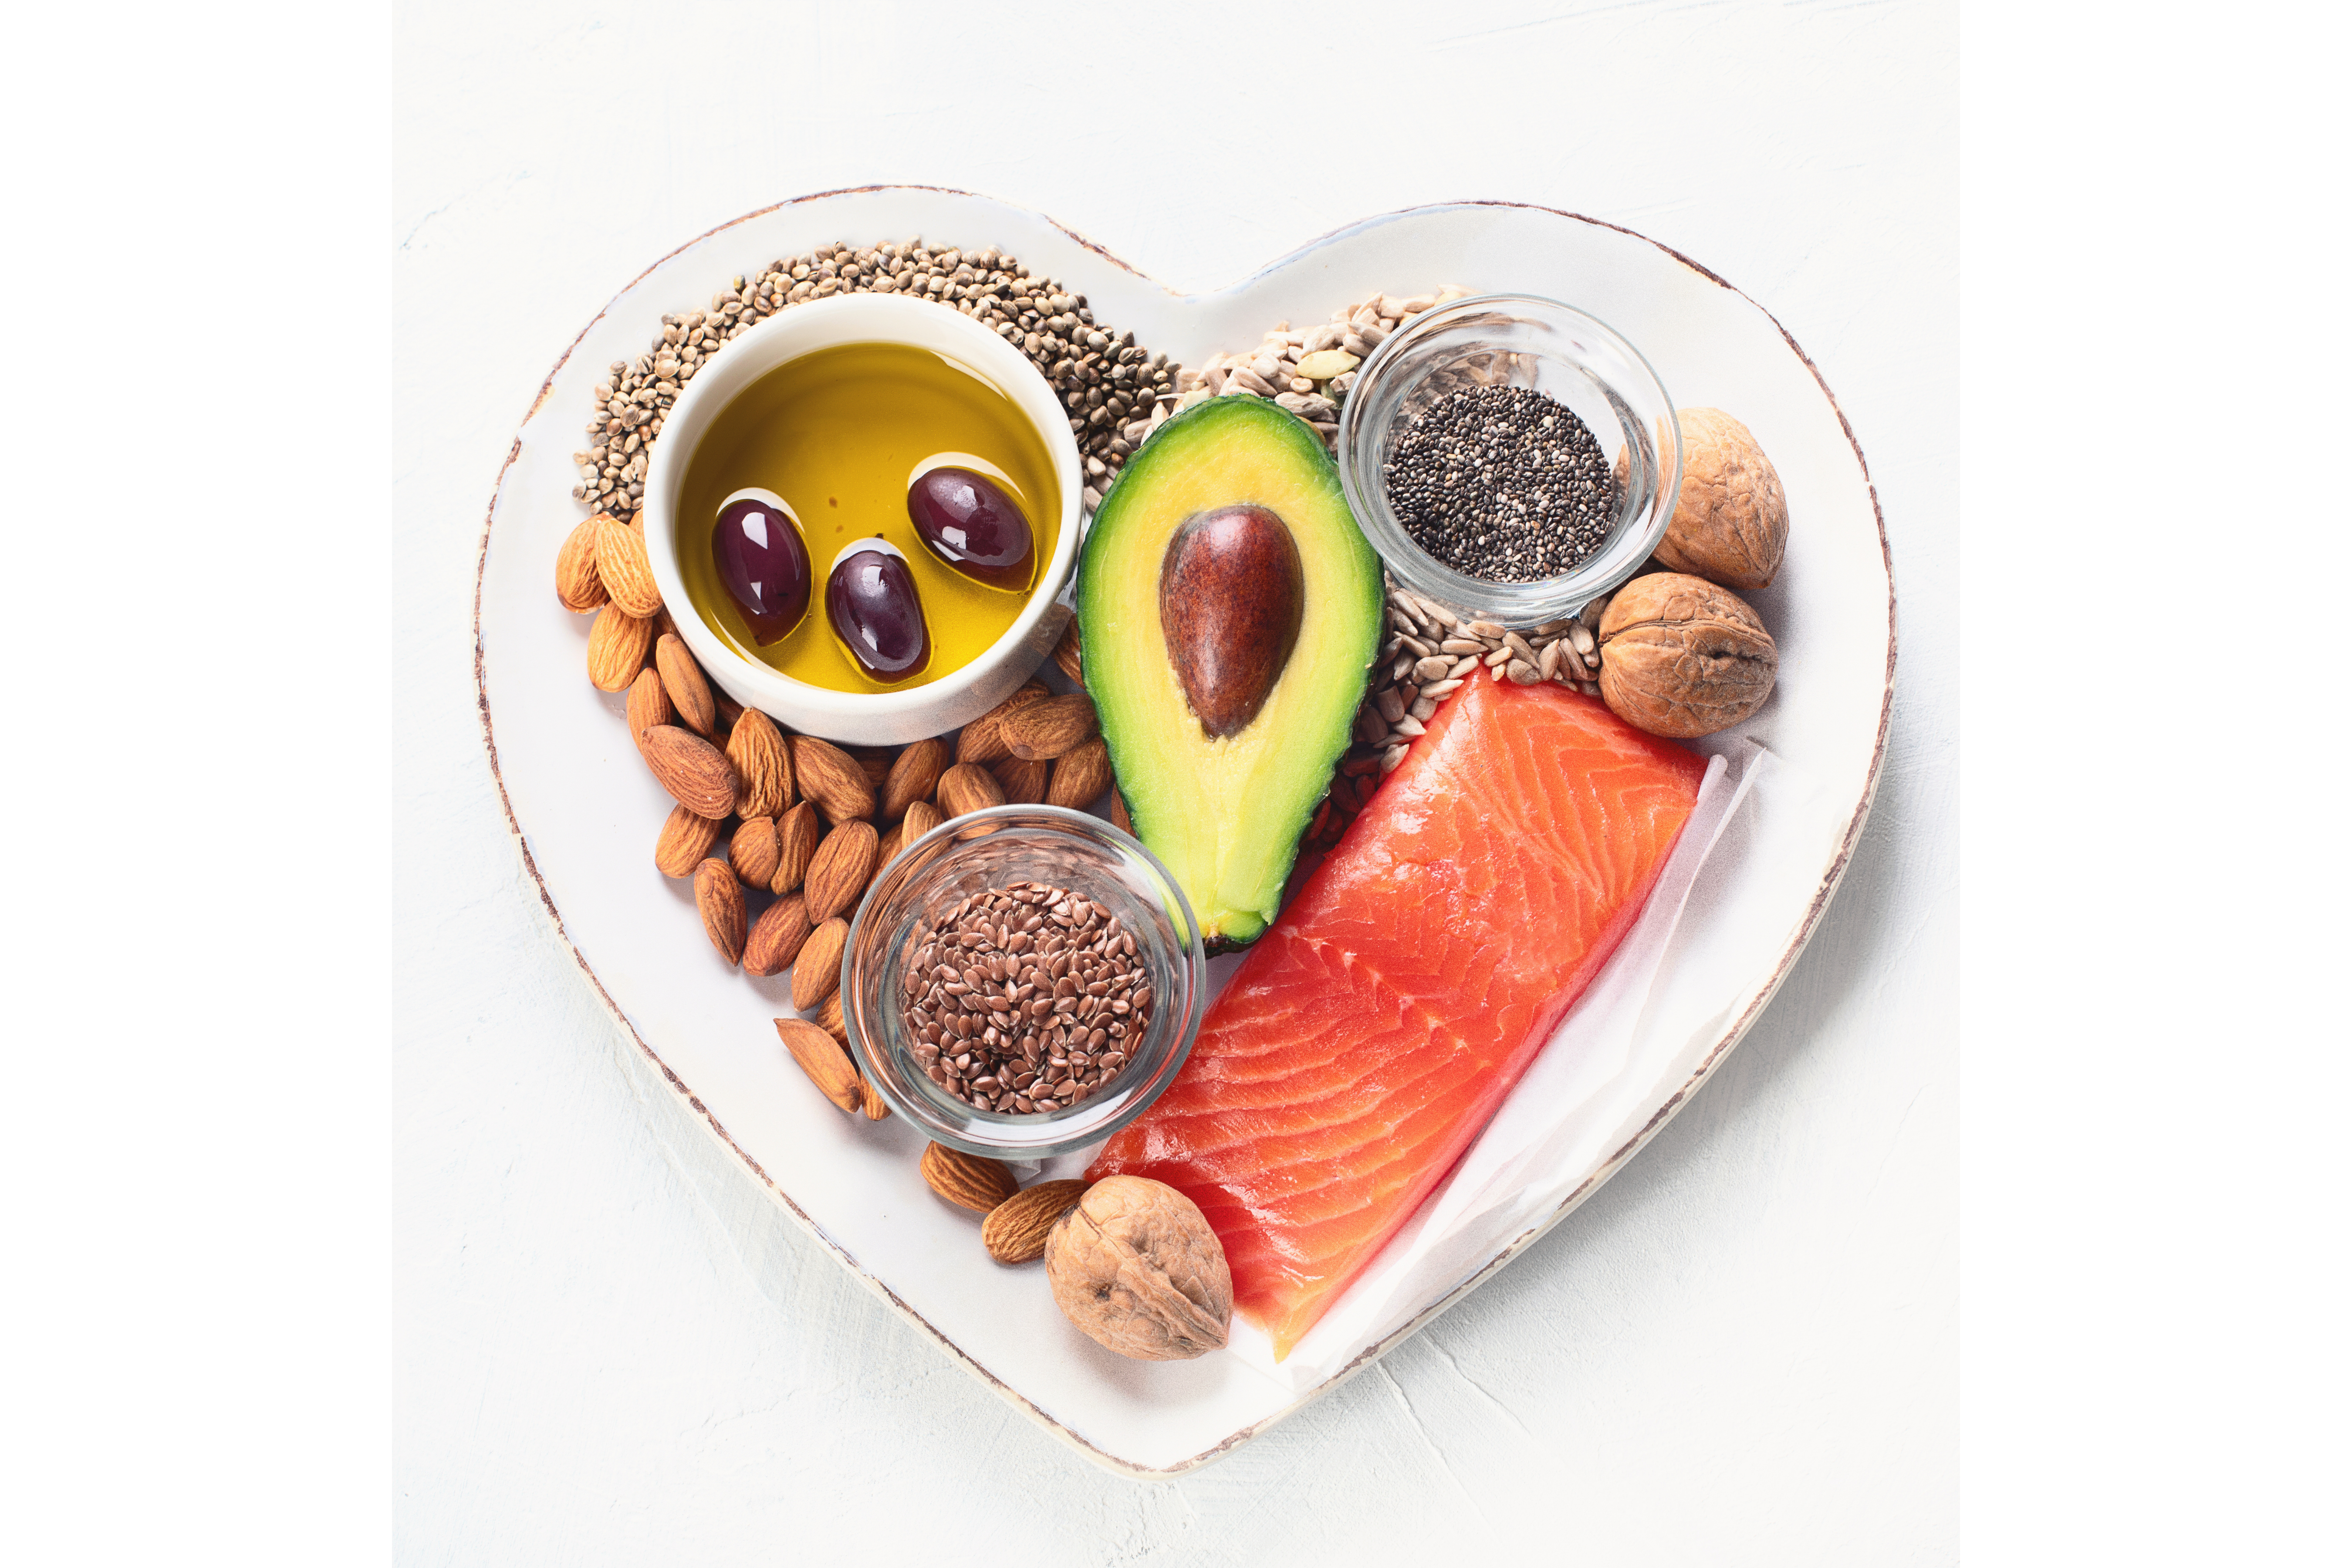 image of various healthy fats in a heart shaped bowl including avocado, olives, nuts, seeds, and salmon